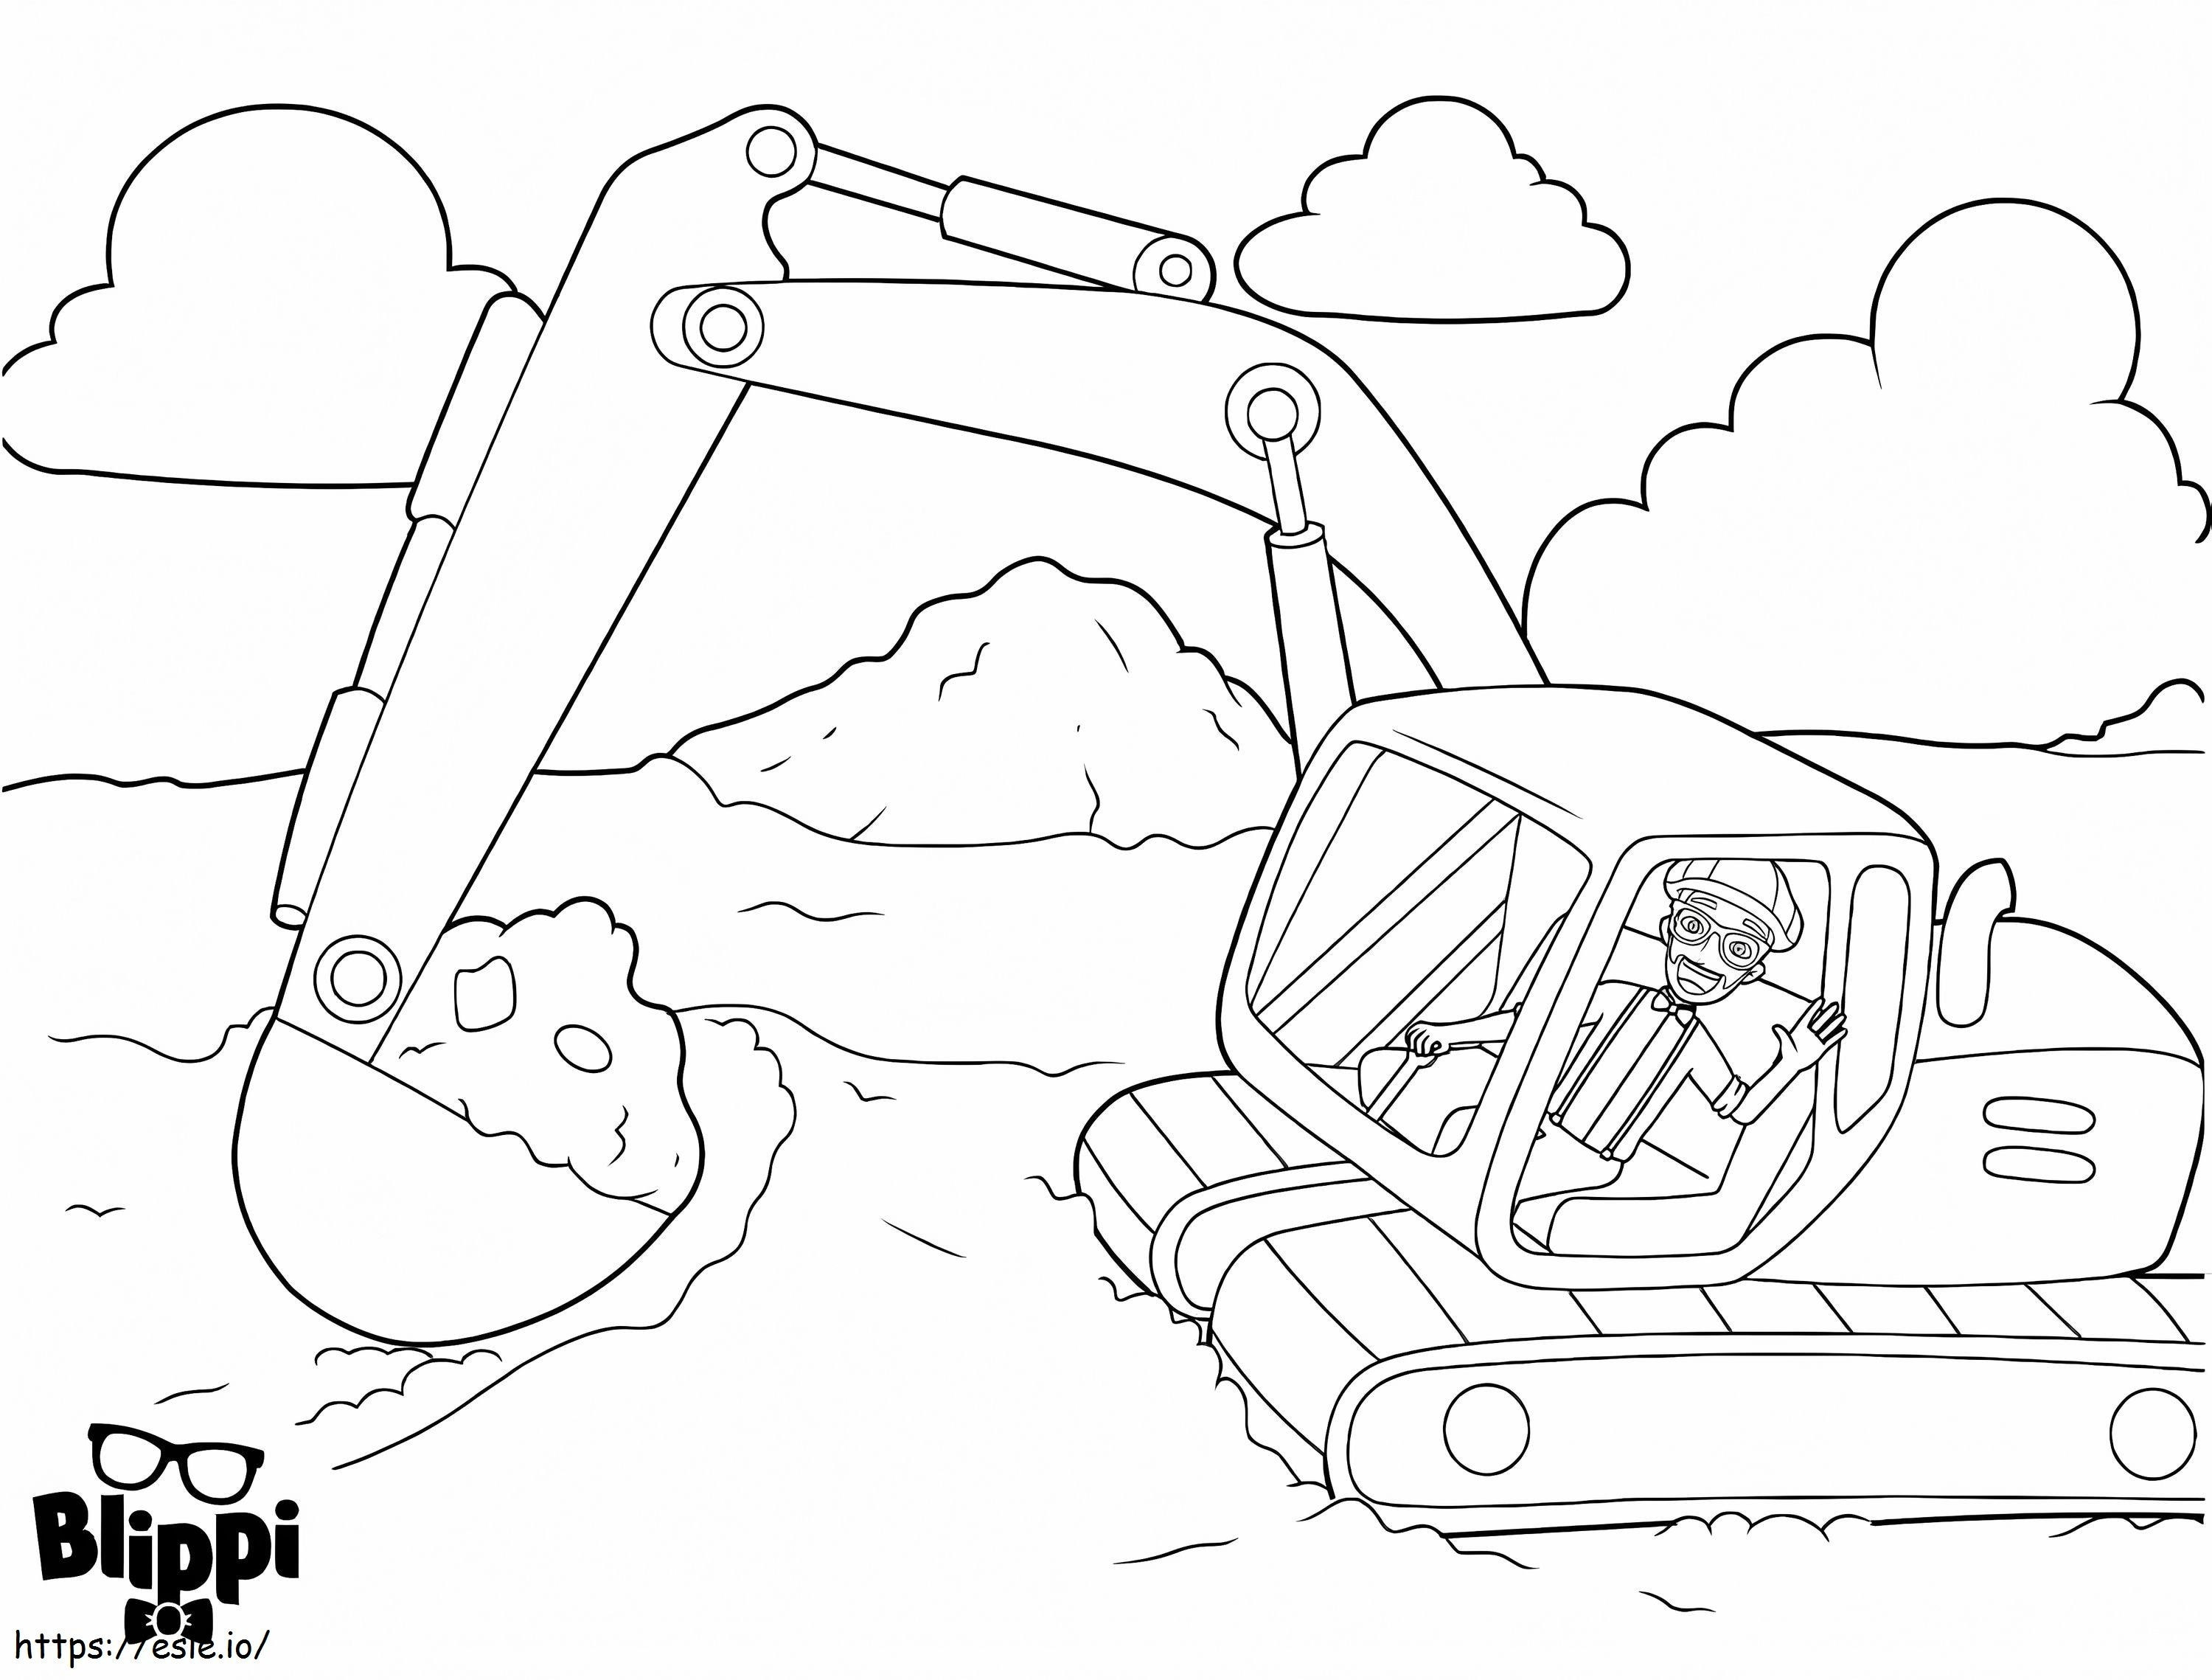 Blippi Driving Excavator coloring page